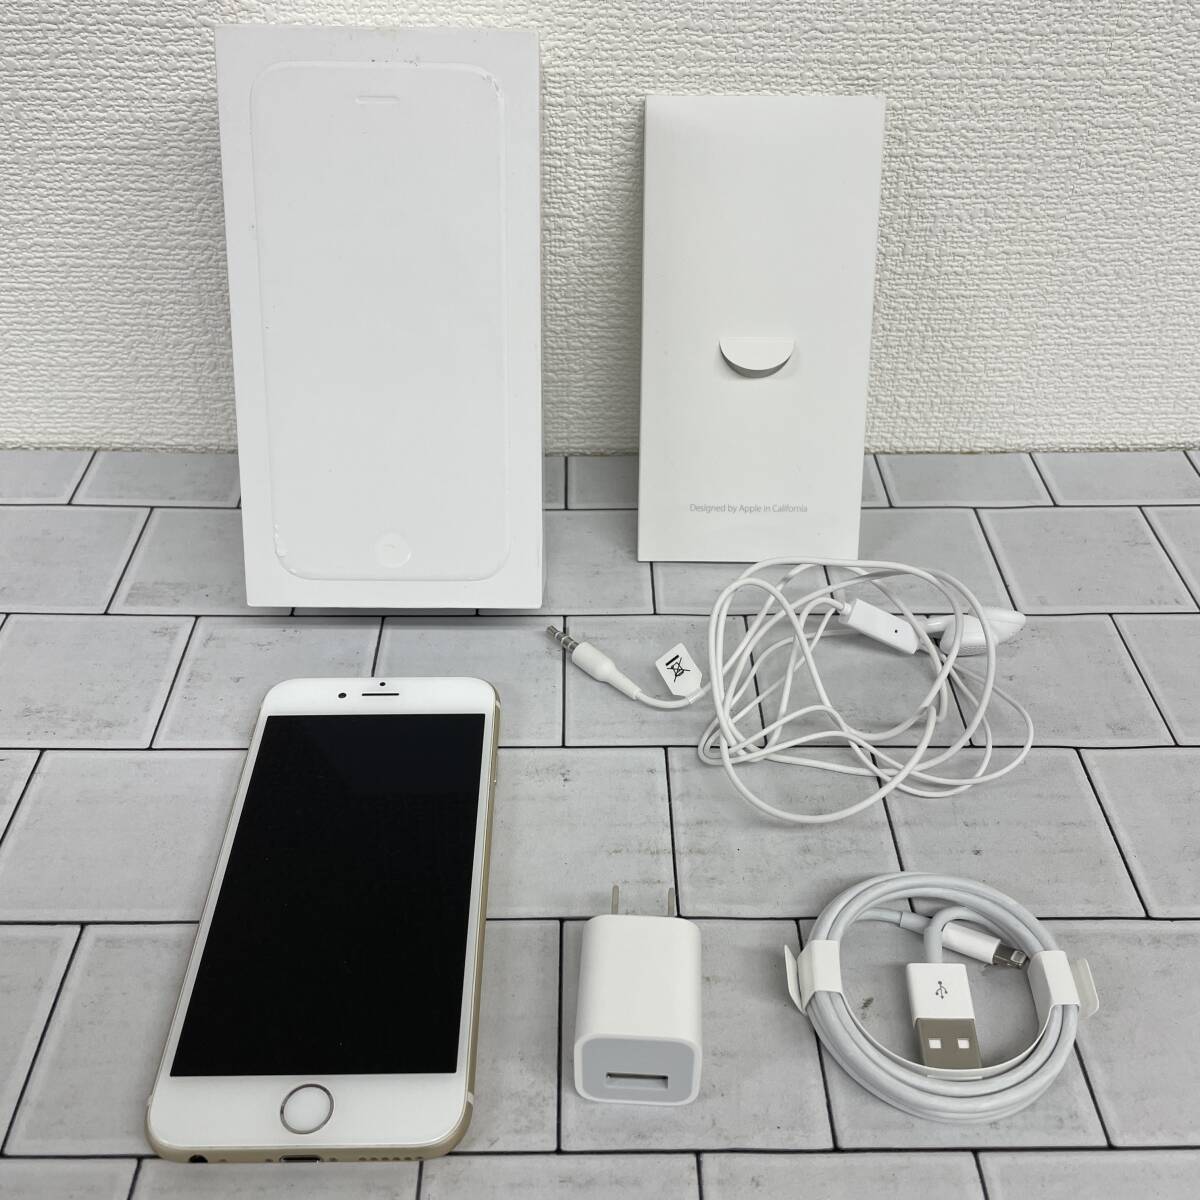 E049-M24-14 ◎ Apple iPhone6 16GB MG492J A A1586 Gold 付属品付き 通電確認済み_画像1